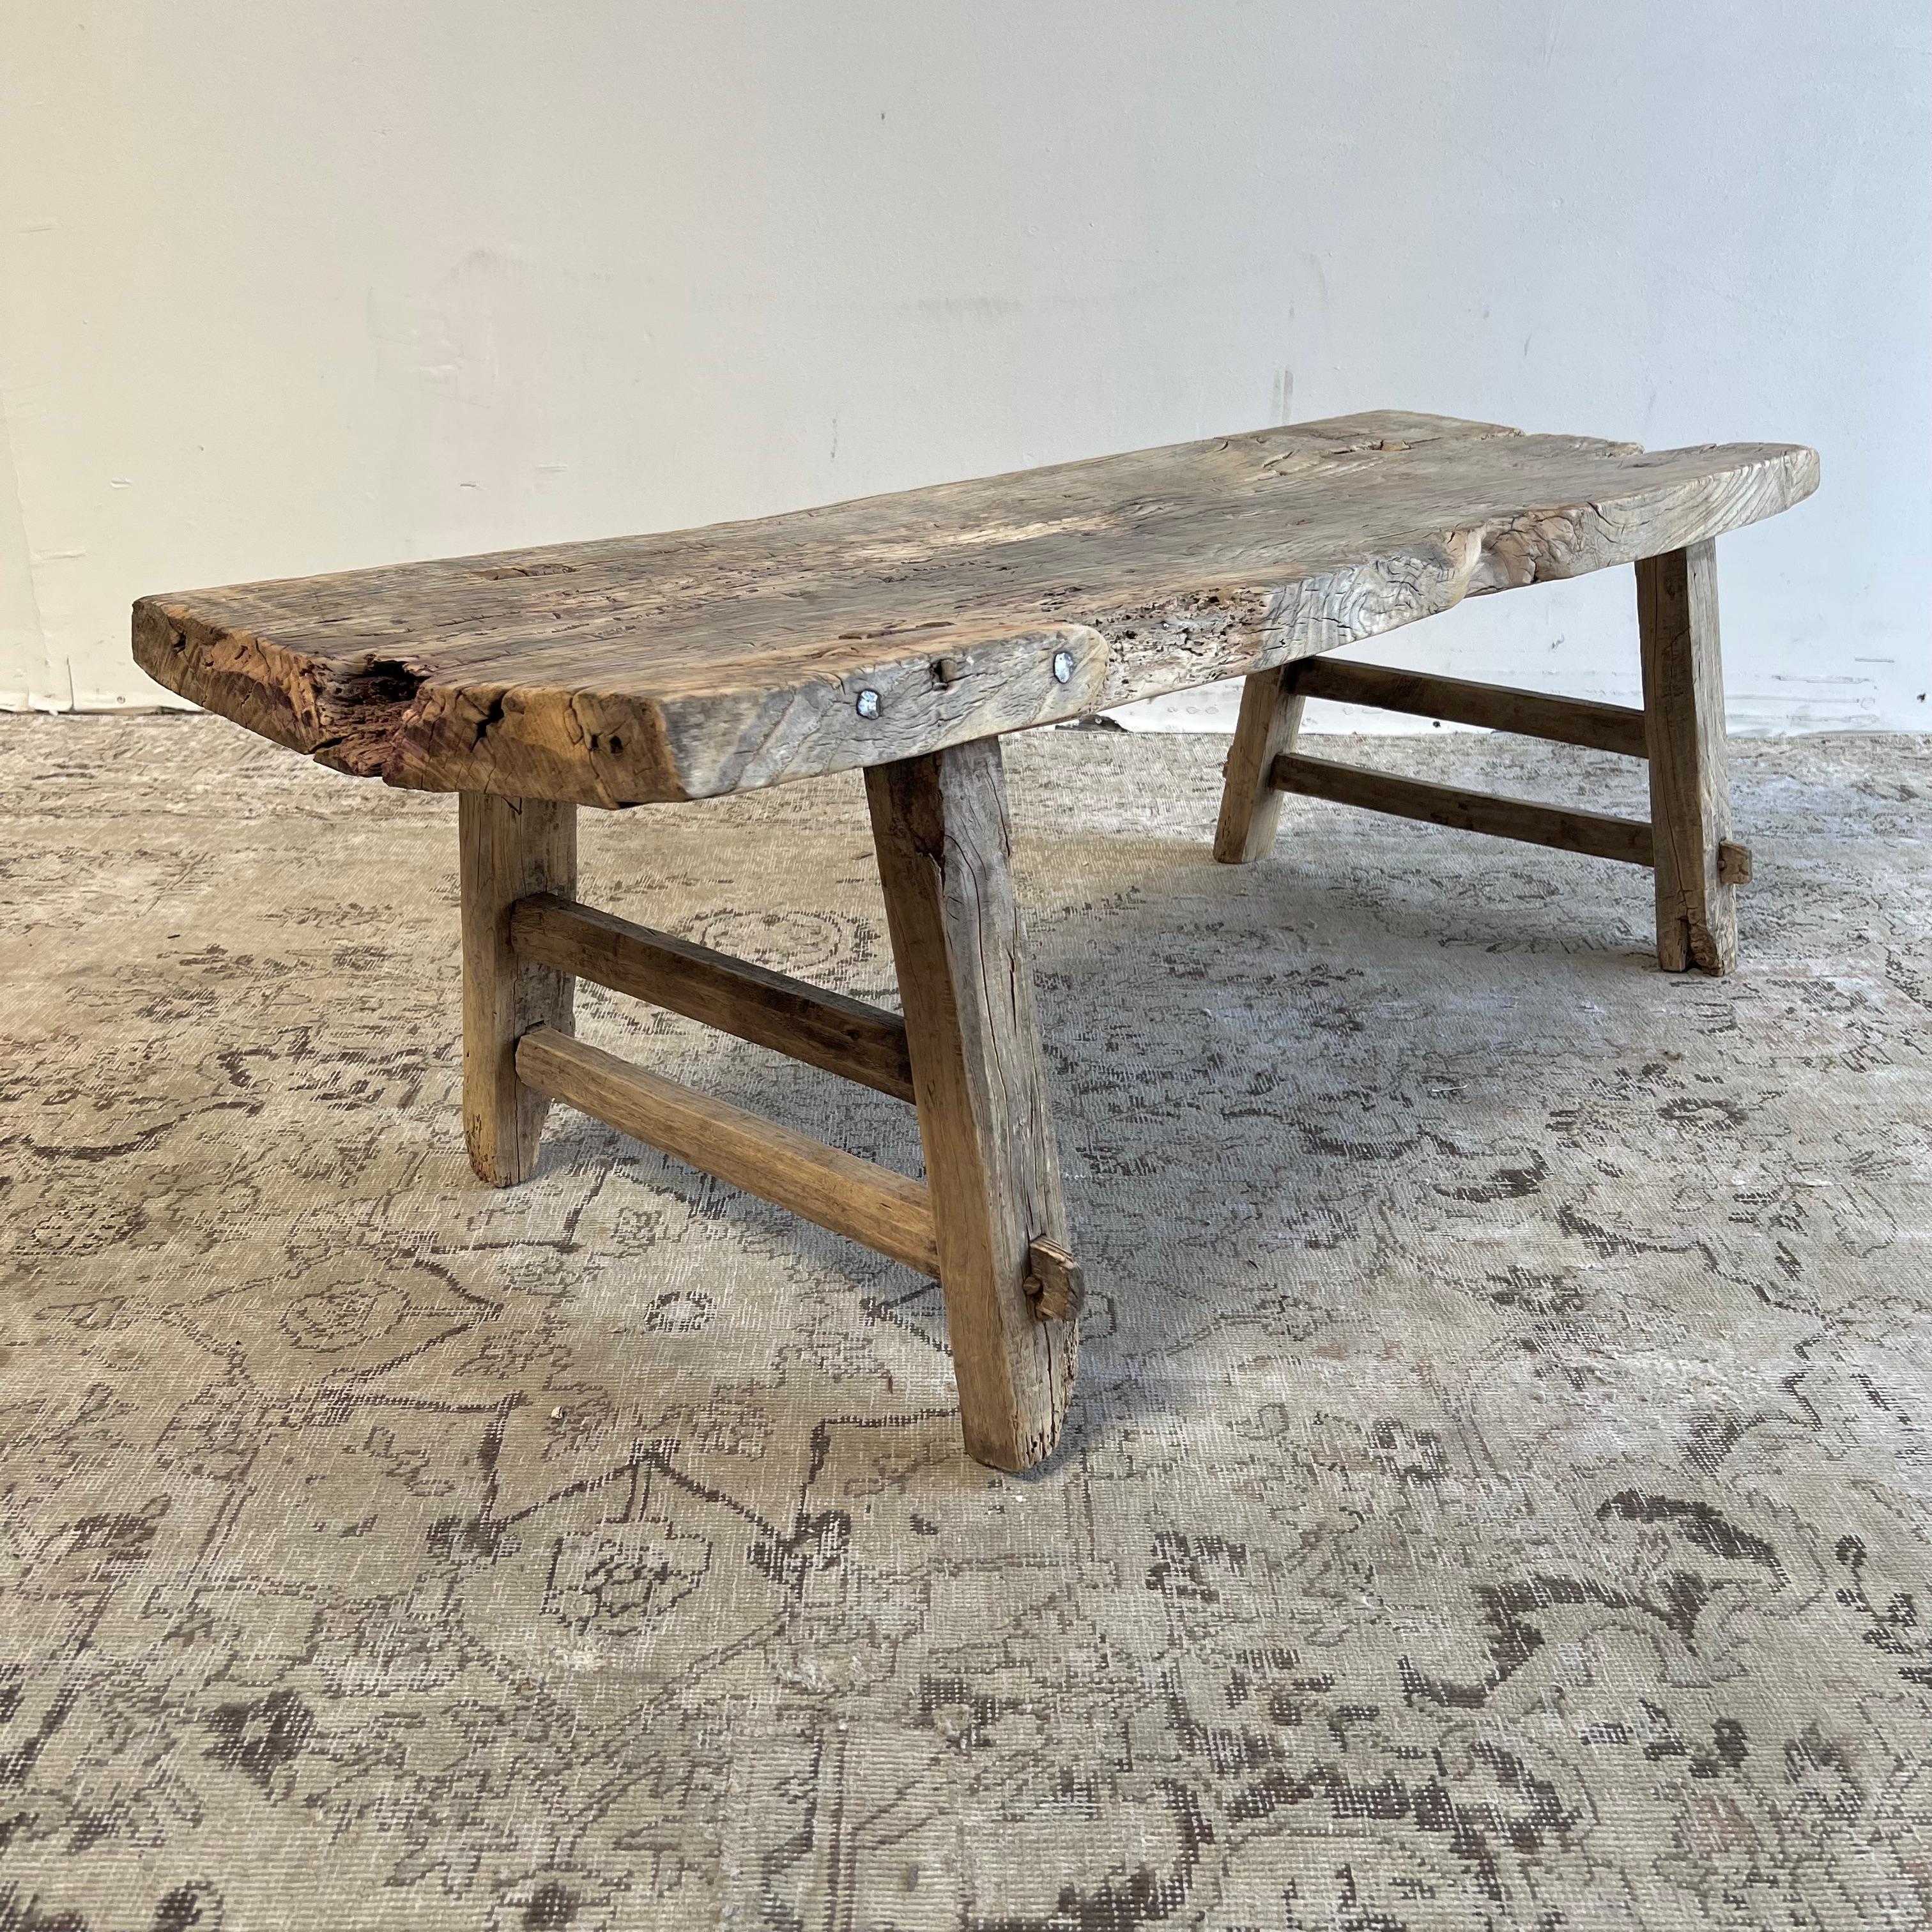 Vintage antique elm wood coffee table with beautiful antique weathered patina top Beautiful antique patina, with weathering and age, these are solid and sturdy ready for daily use, use as a coffee table or entry bench. Each piece is truly unique and